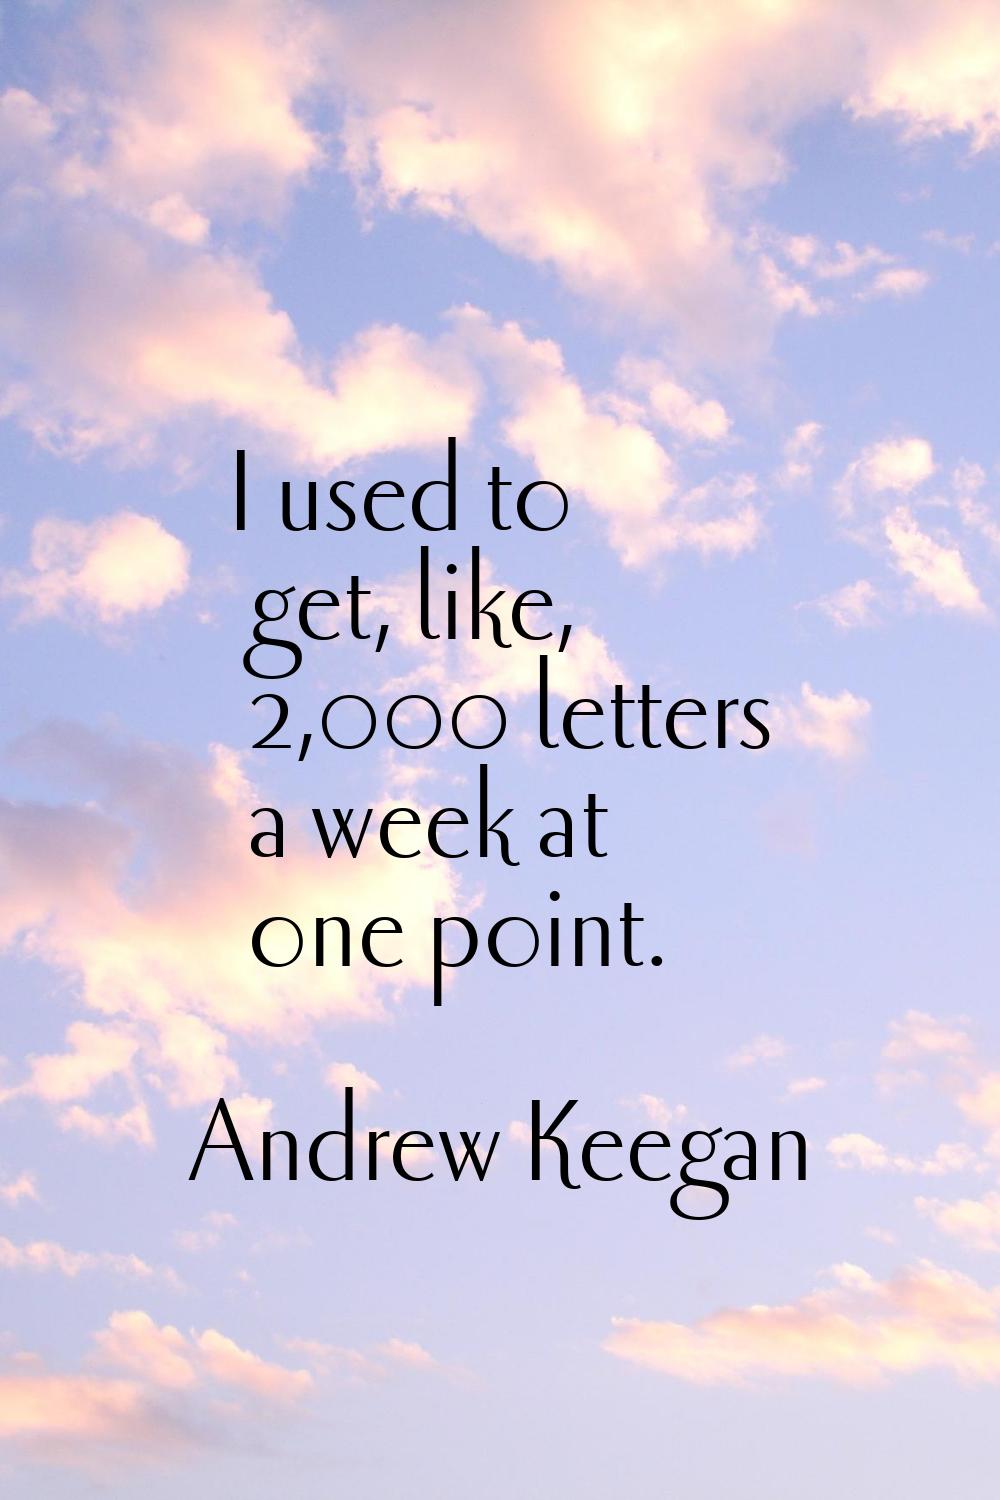 I used to get, like, 2,000 letters a week at one point.